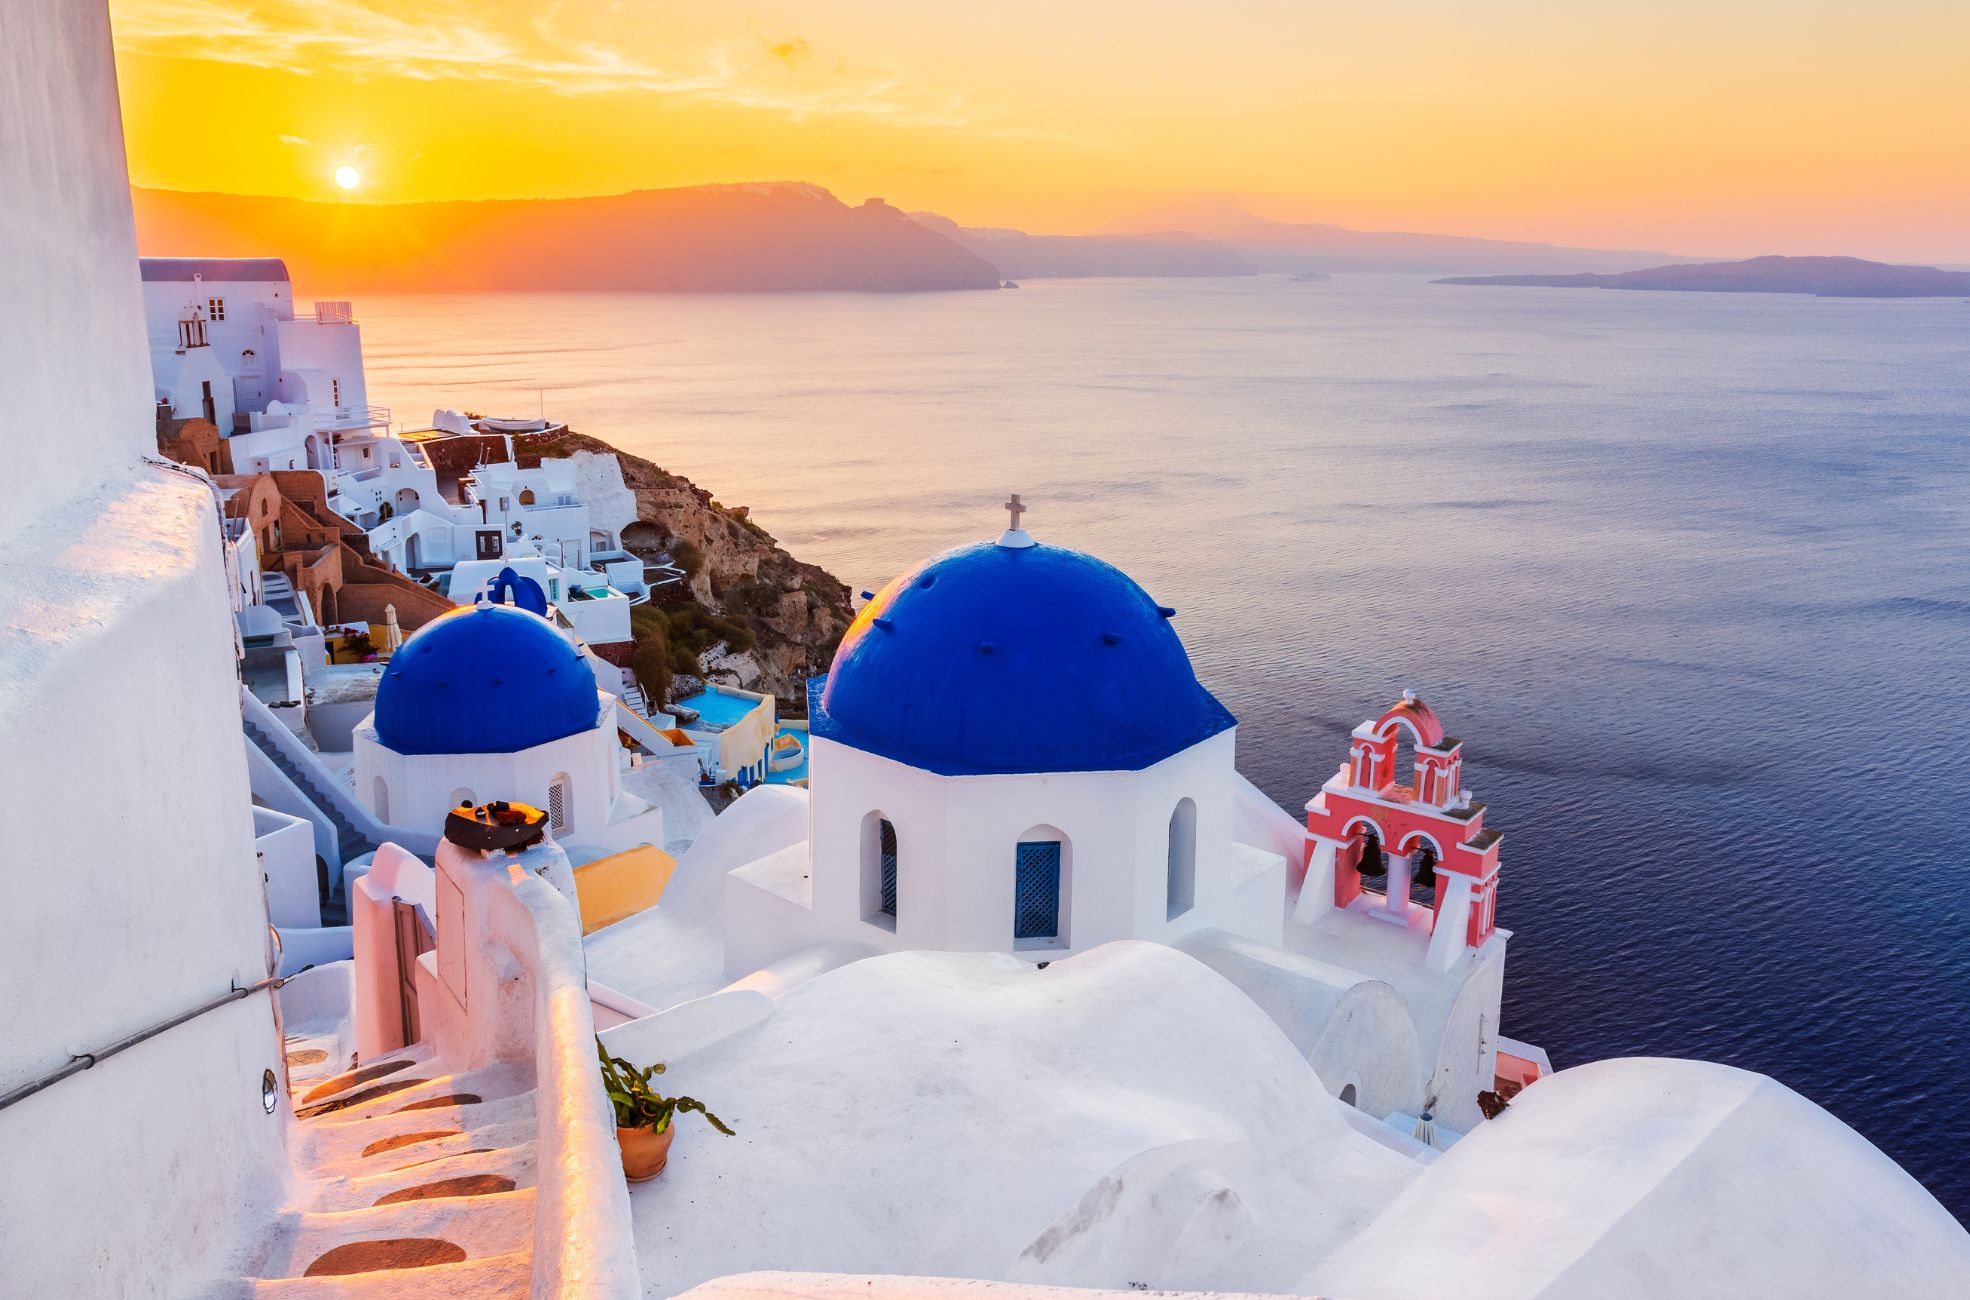 A photo of Greece taken in the late evening, showcasing the beautiful sunset over the mountains and water.